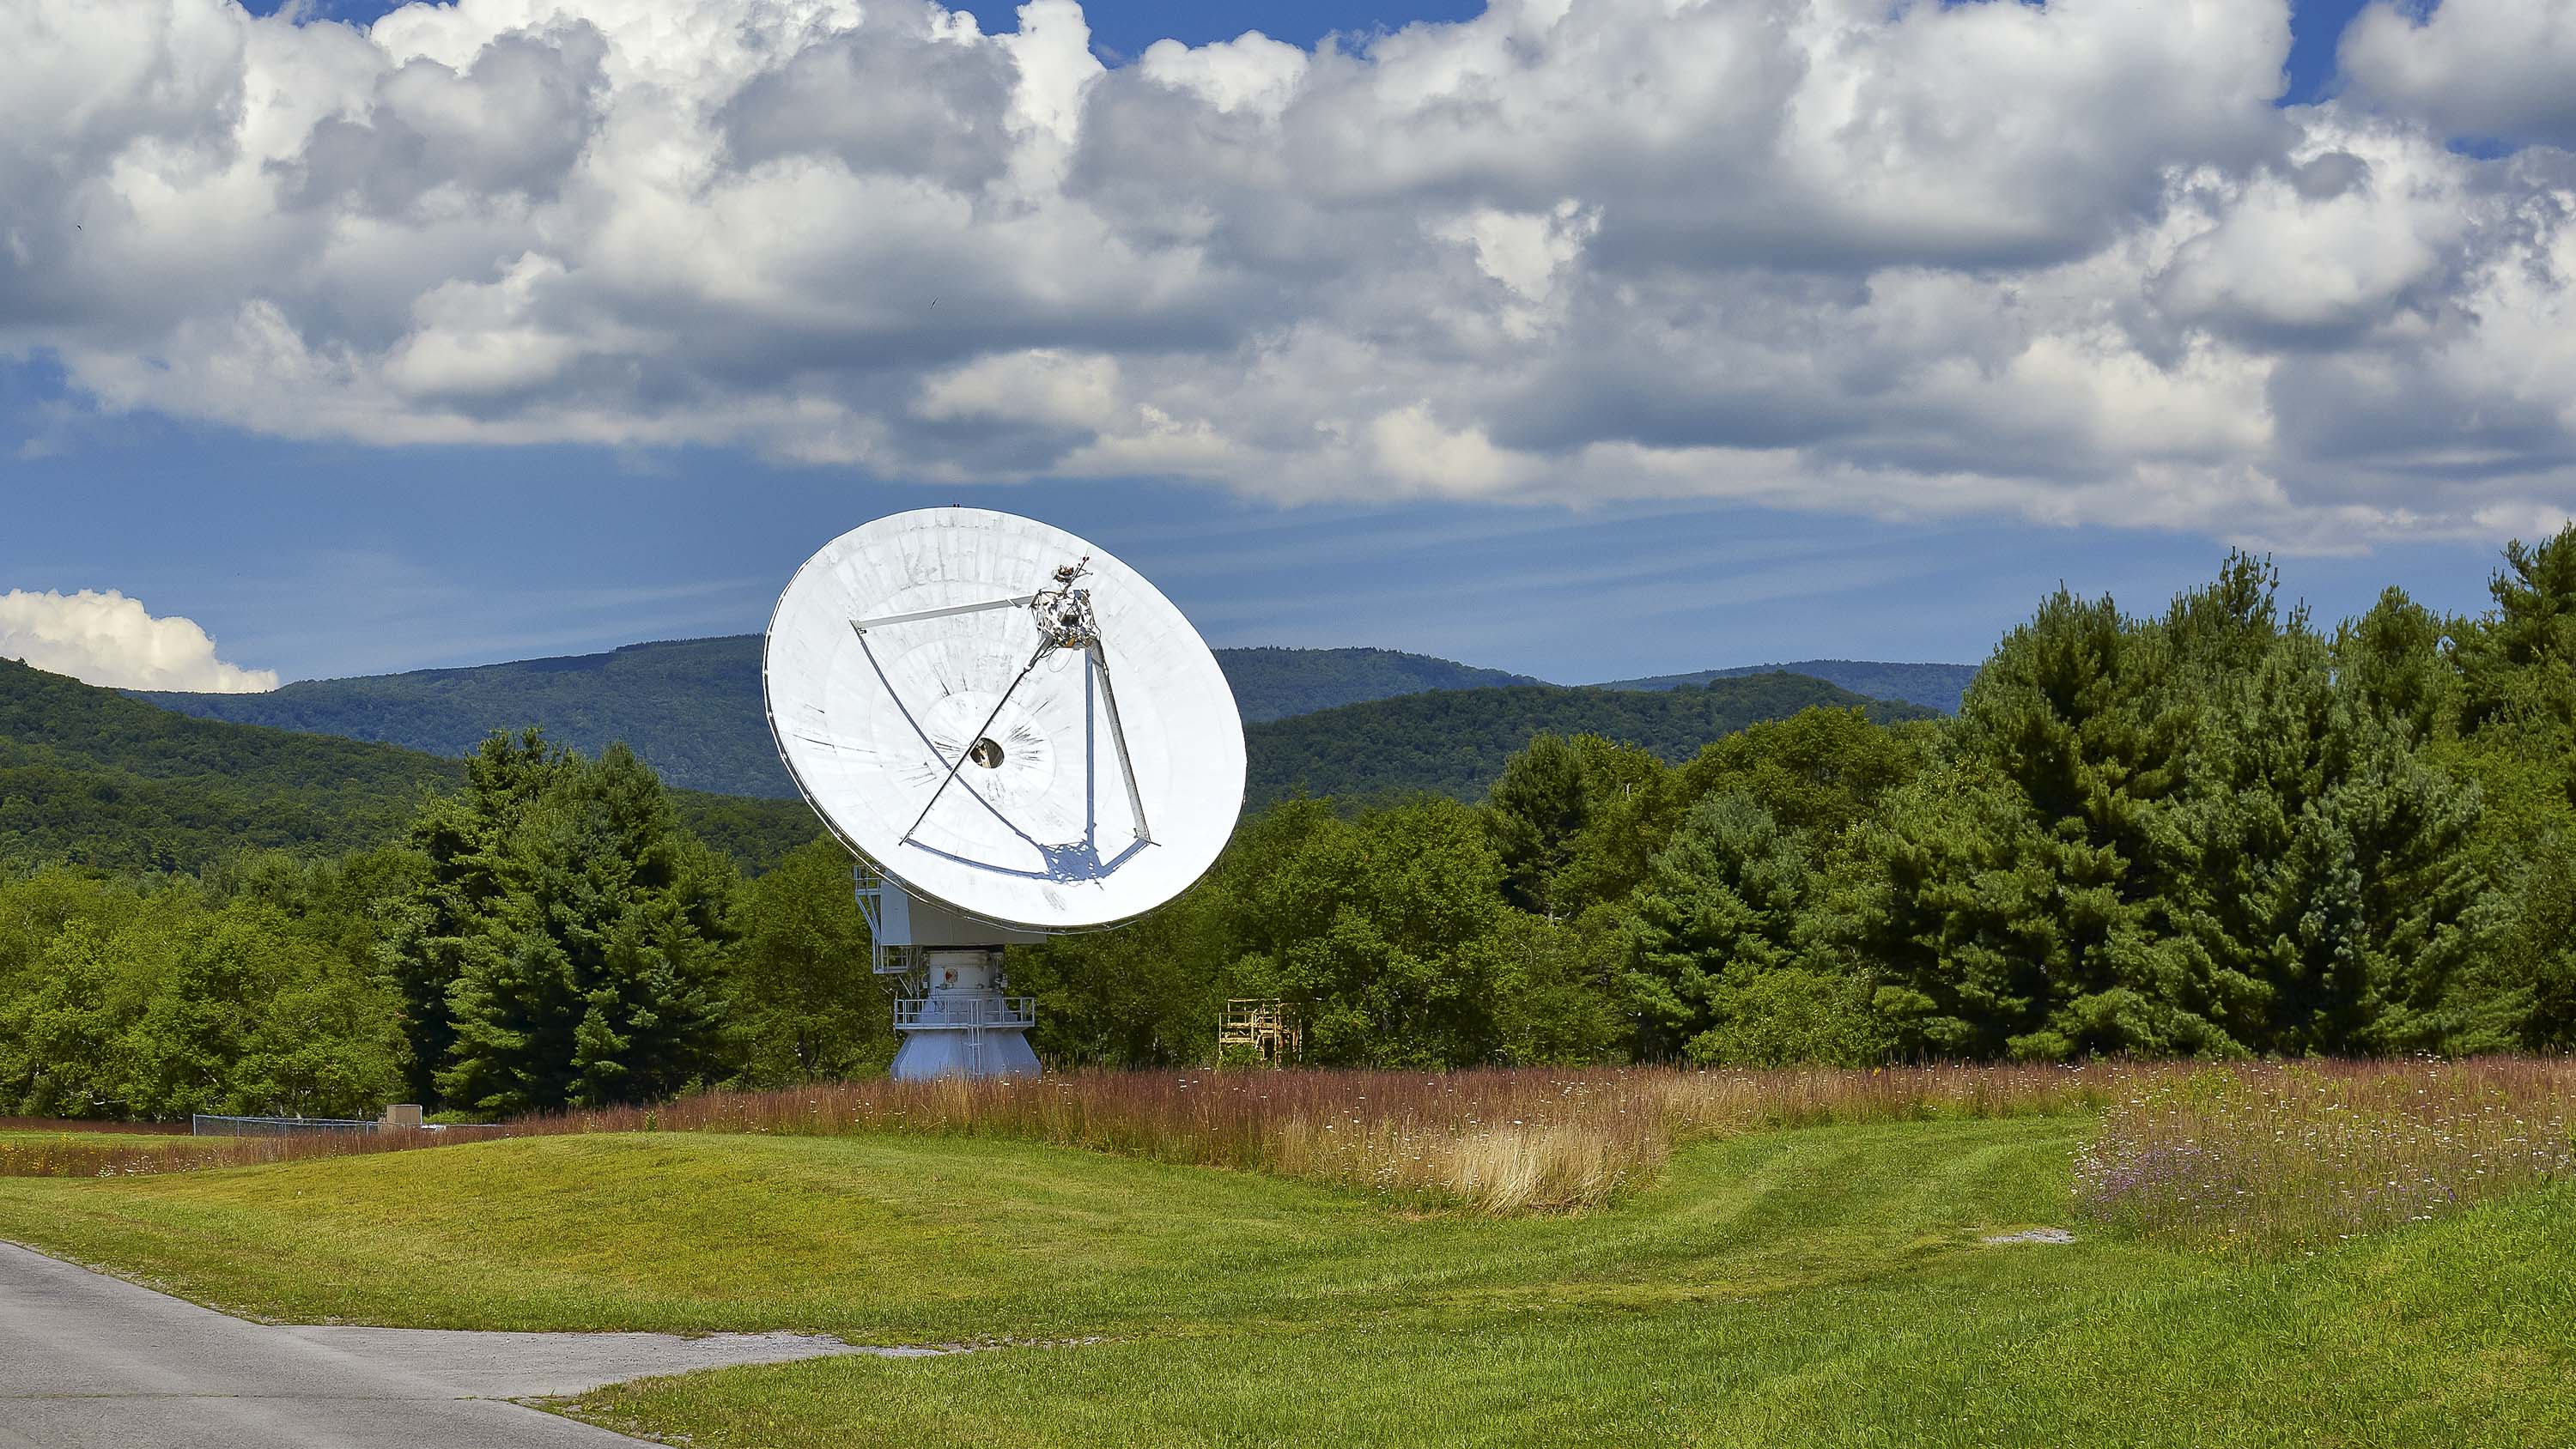 <p><strong>Estimated cost:</strong> $1,016</p> <p>Green Bank lies in the 13,000-square-mile National Radio Quiet Zone where TV, Wi-Fi, cellphones and even microwaves are verboten. The silence avoids interference with the Robert C. Byrd Green Bank Telescope, which listens for energies in outer space as minute as a lone snowflake hitting the ground.</p> <p>You can't upload selfies, but you can call your friends from a genuine payphone, something that's hard to find in the rest of the U.S. Enjoy a respite from electromagnetic fields in Green Bank, and take a telescope tour, visit the observatory's science center or hike miles of unspoiled nature.</p> <p><strong>How to get there:</strong> Fly to Charlottesville, Virgina, and rent a car, as trains and buses only run within an hour's drive of the town. Just make sure it doesn't have automatic tire pressure sensors, which interfere with the telescope.</p>